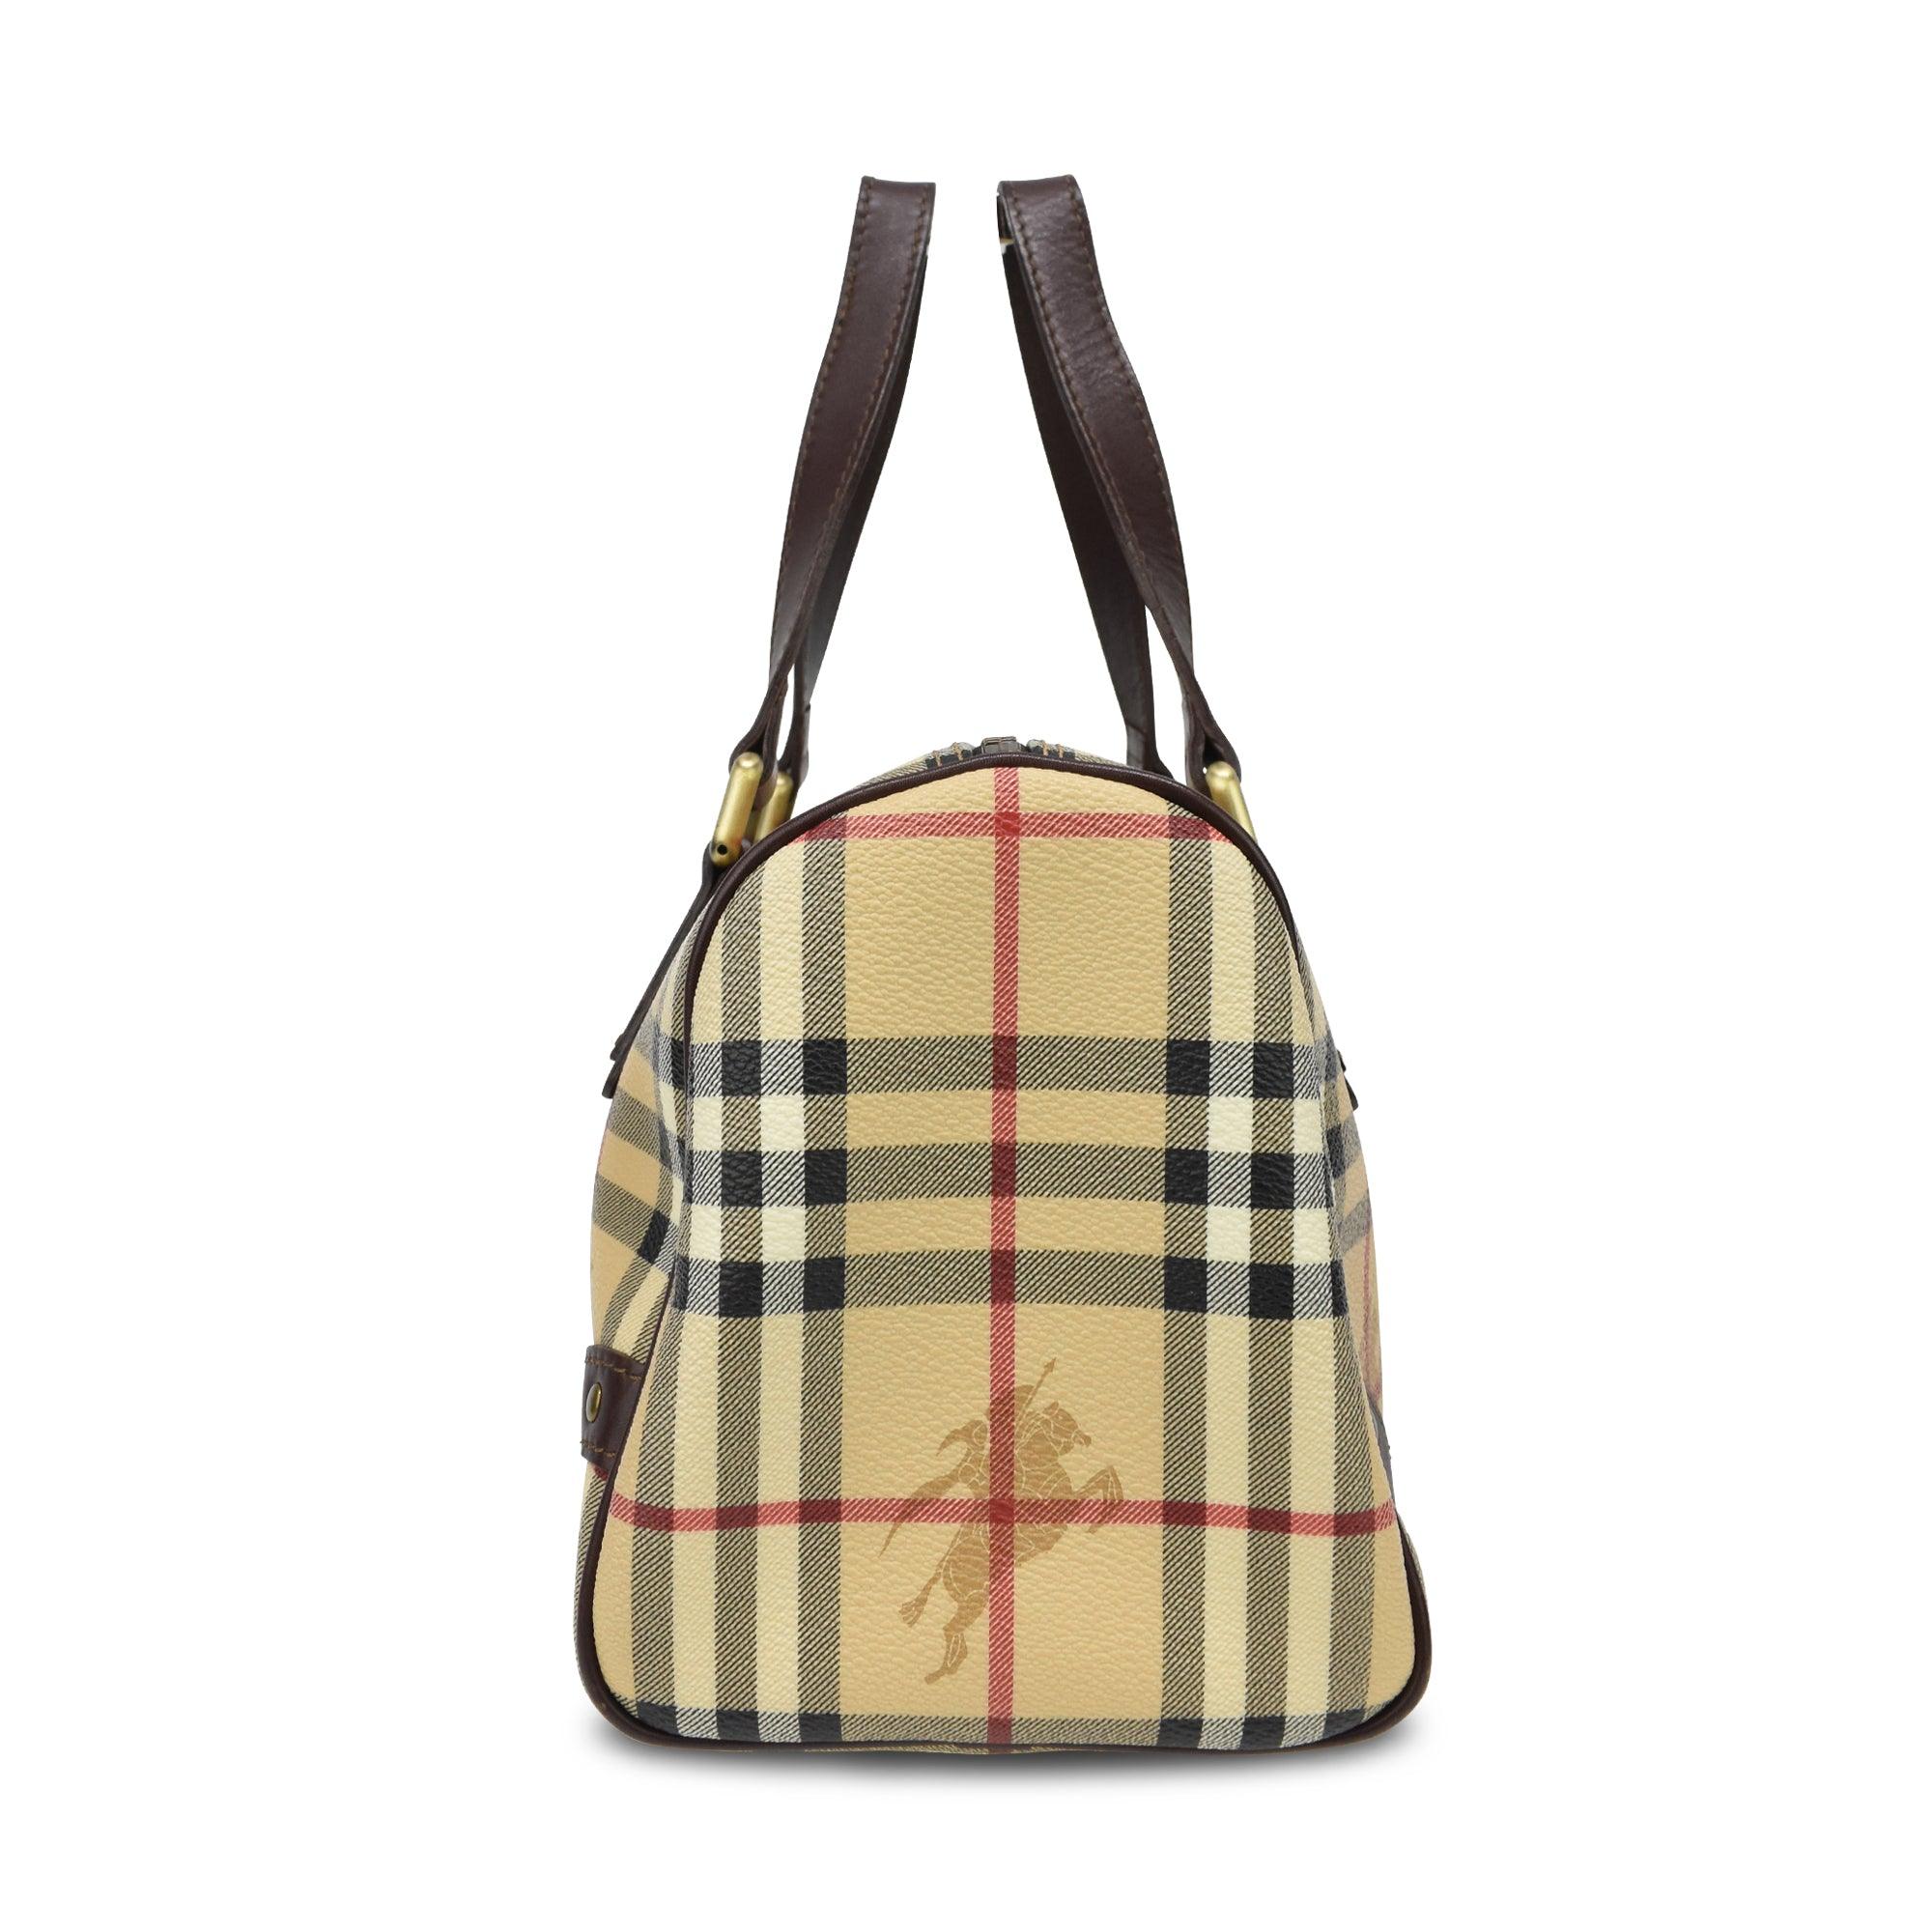 Burberry Boston Bag - Fashionably Yours